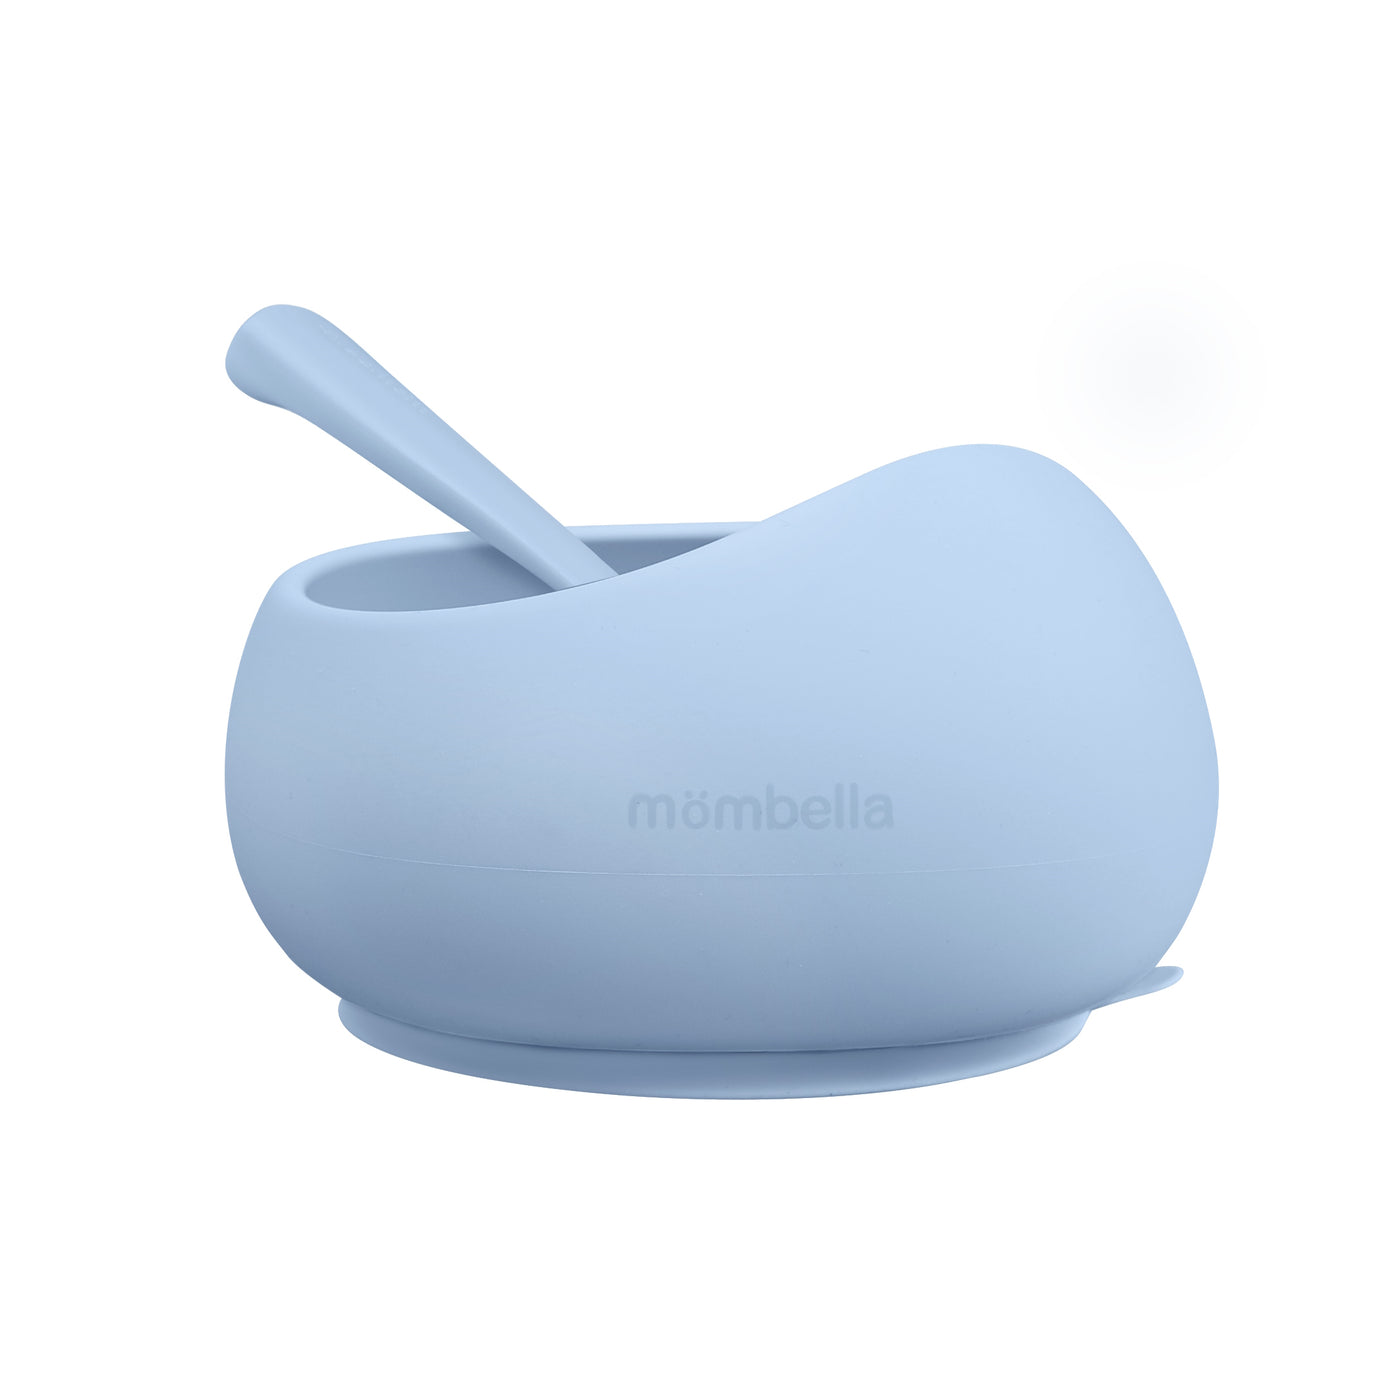 Silicone Suction Bowl - Light Blue